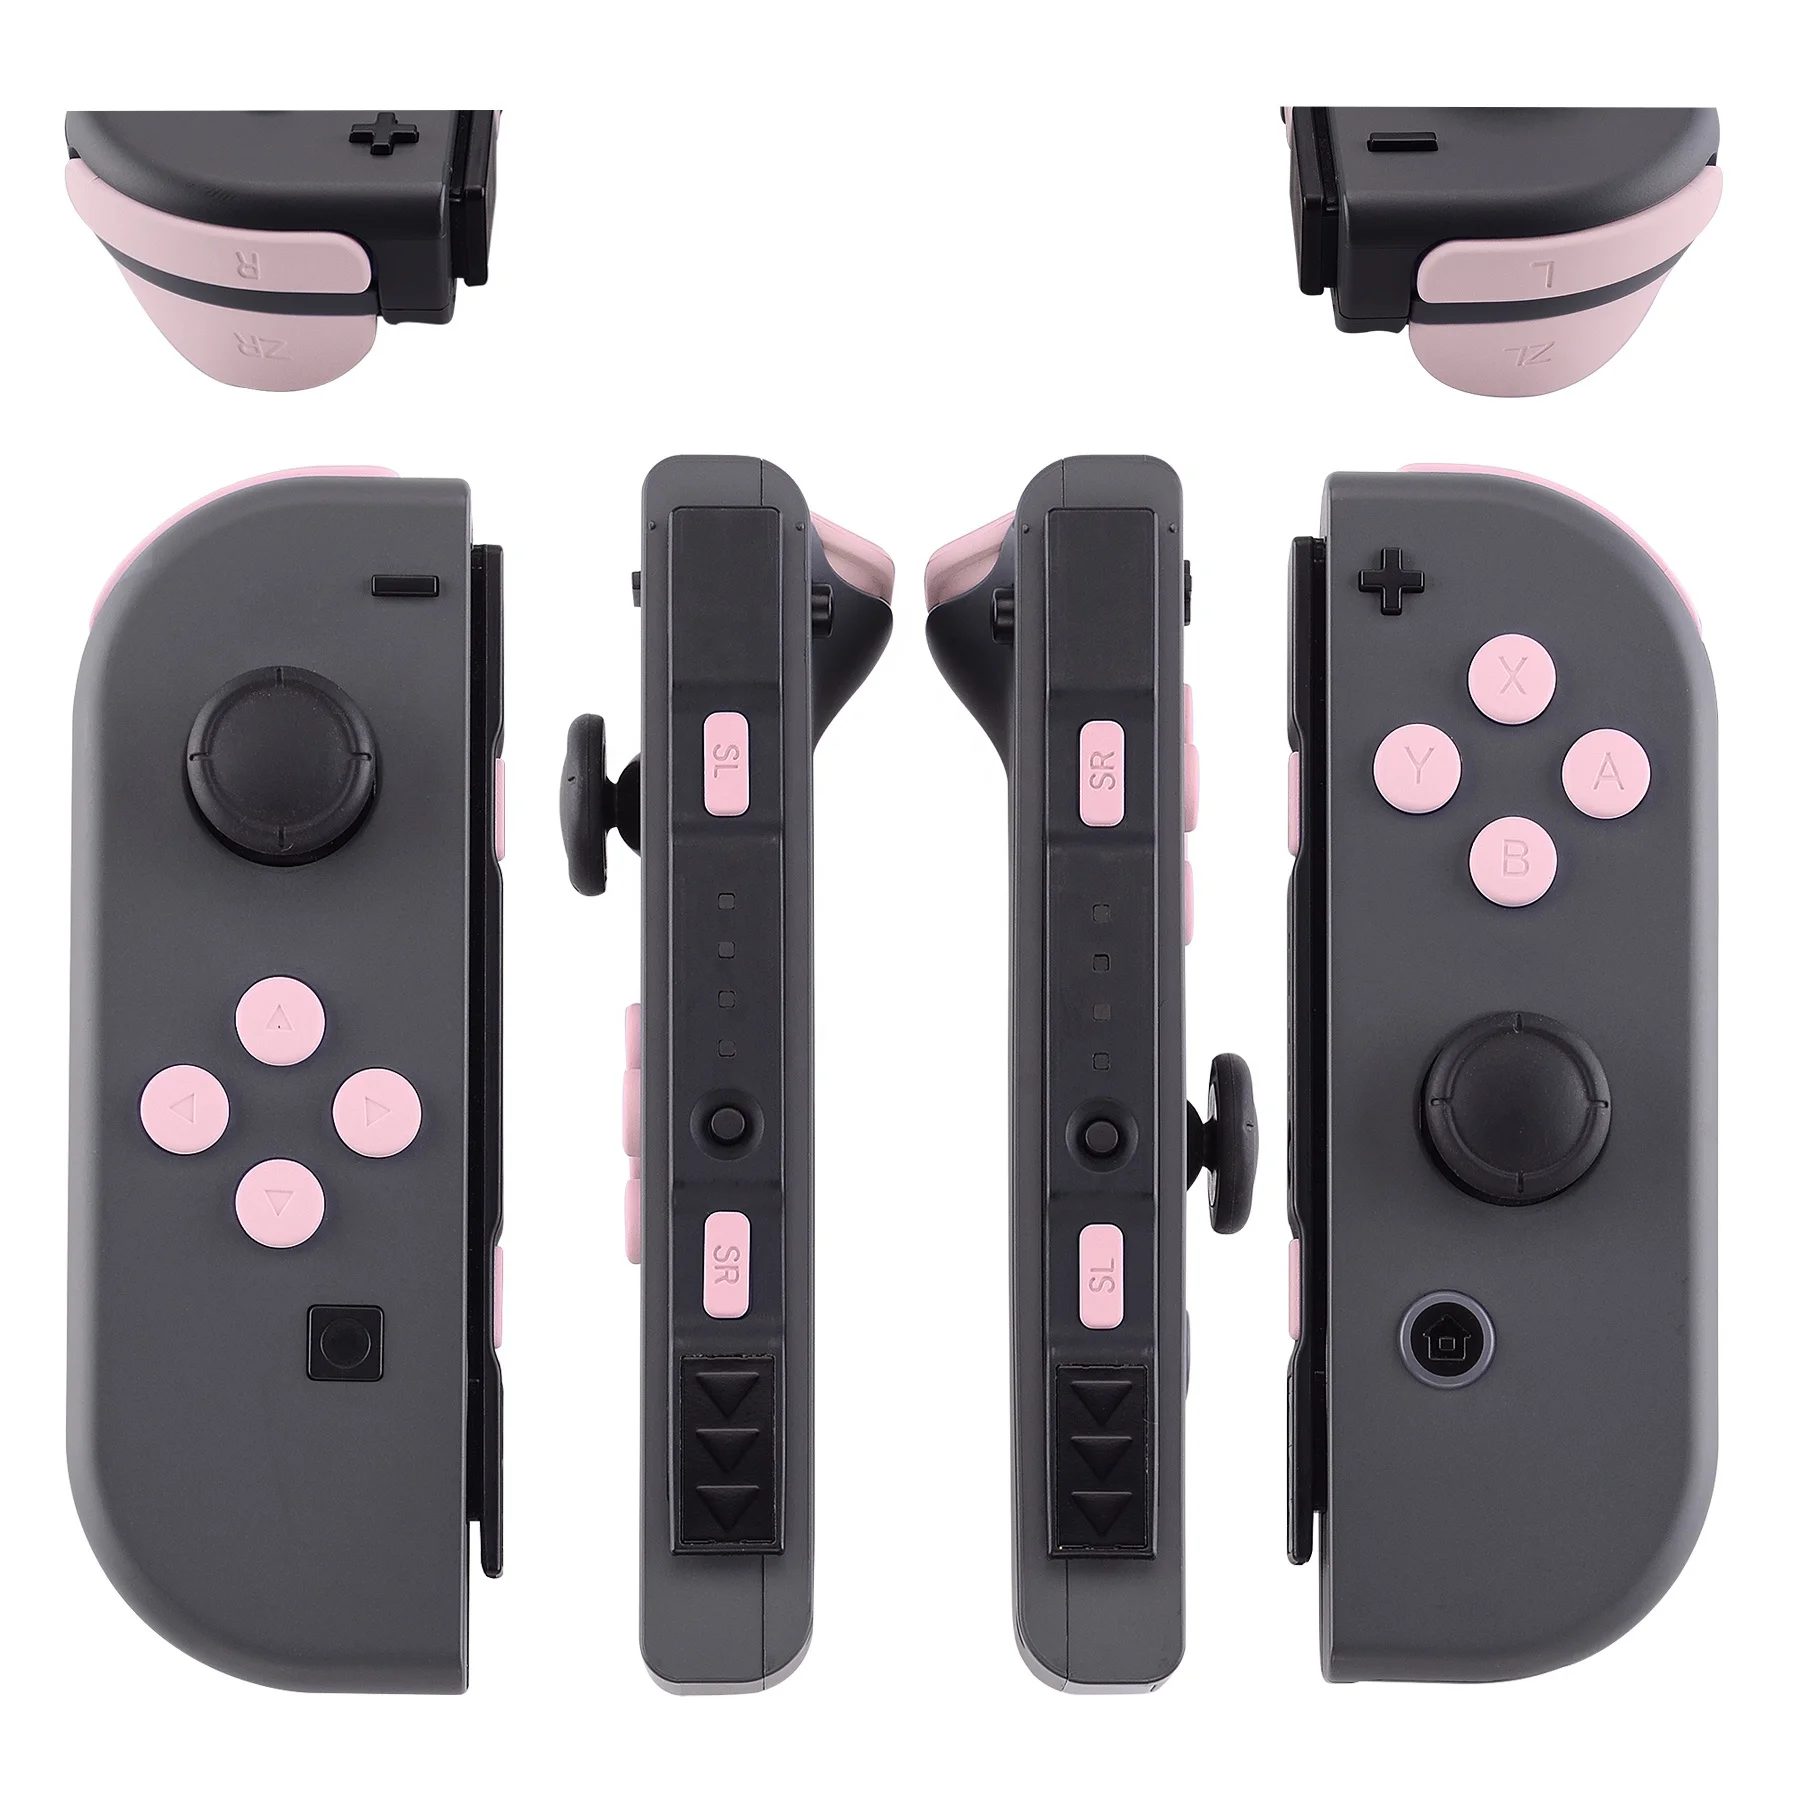 

Pink Action Dpad Home Shooting Joycon Button Full Set Replacement Custom DIY Button Kits For Nintendo Switch & OLED Controller